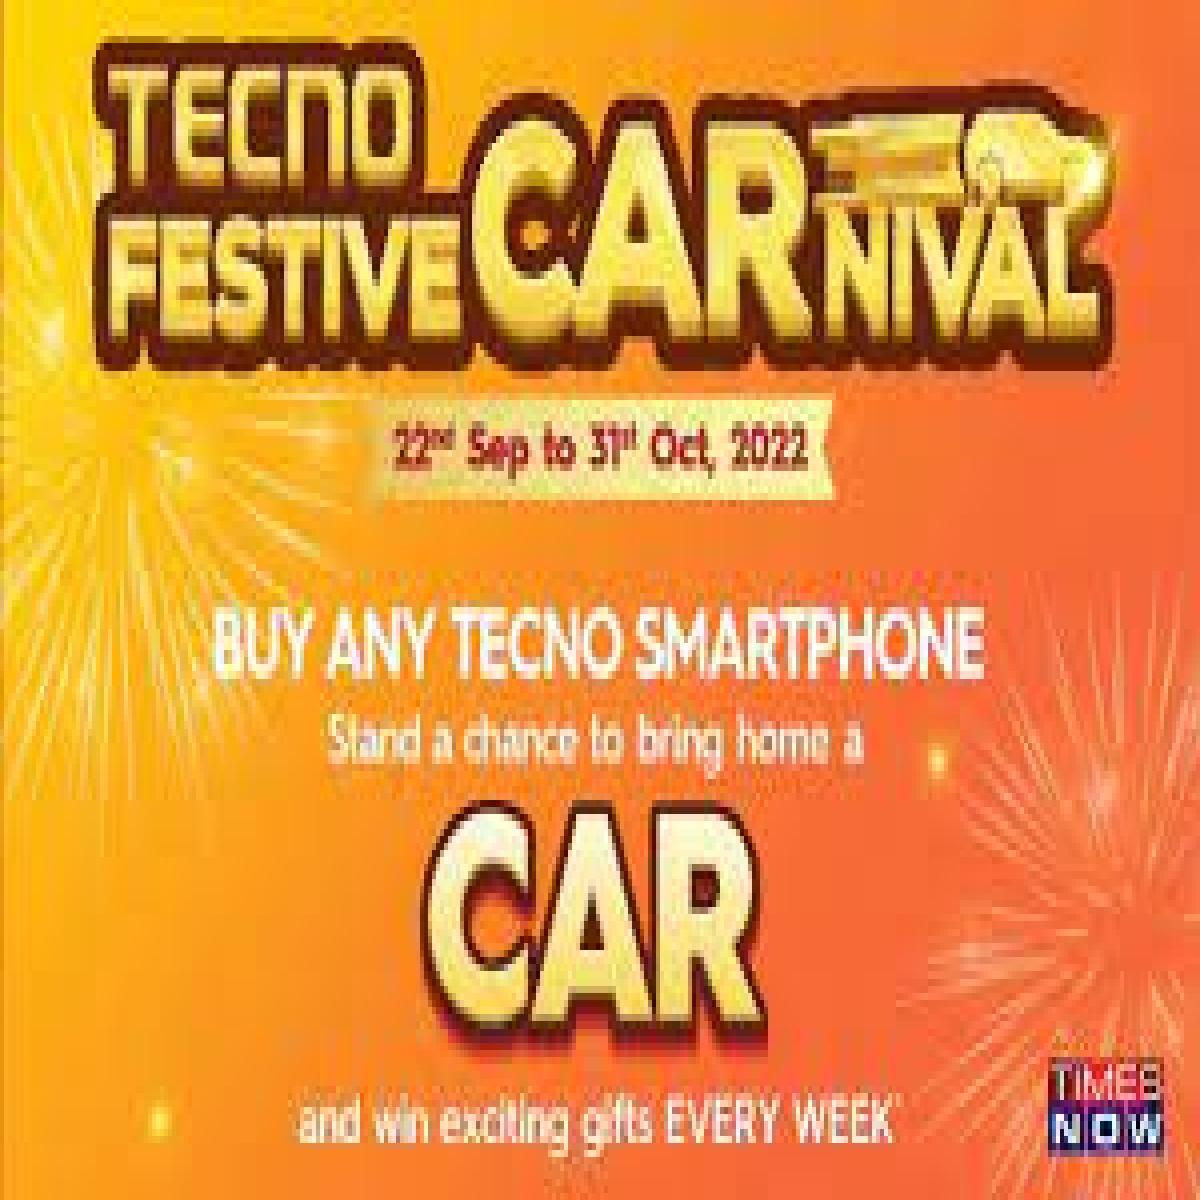 TECNO Mobile Celebrates Festivities with Its 40-Day Festive CARnival